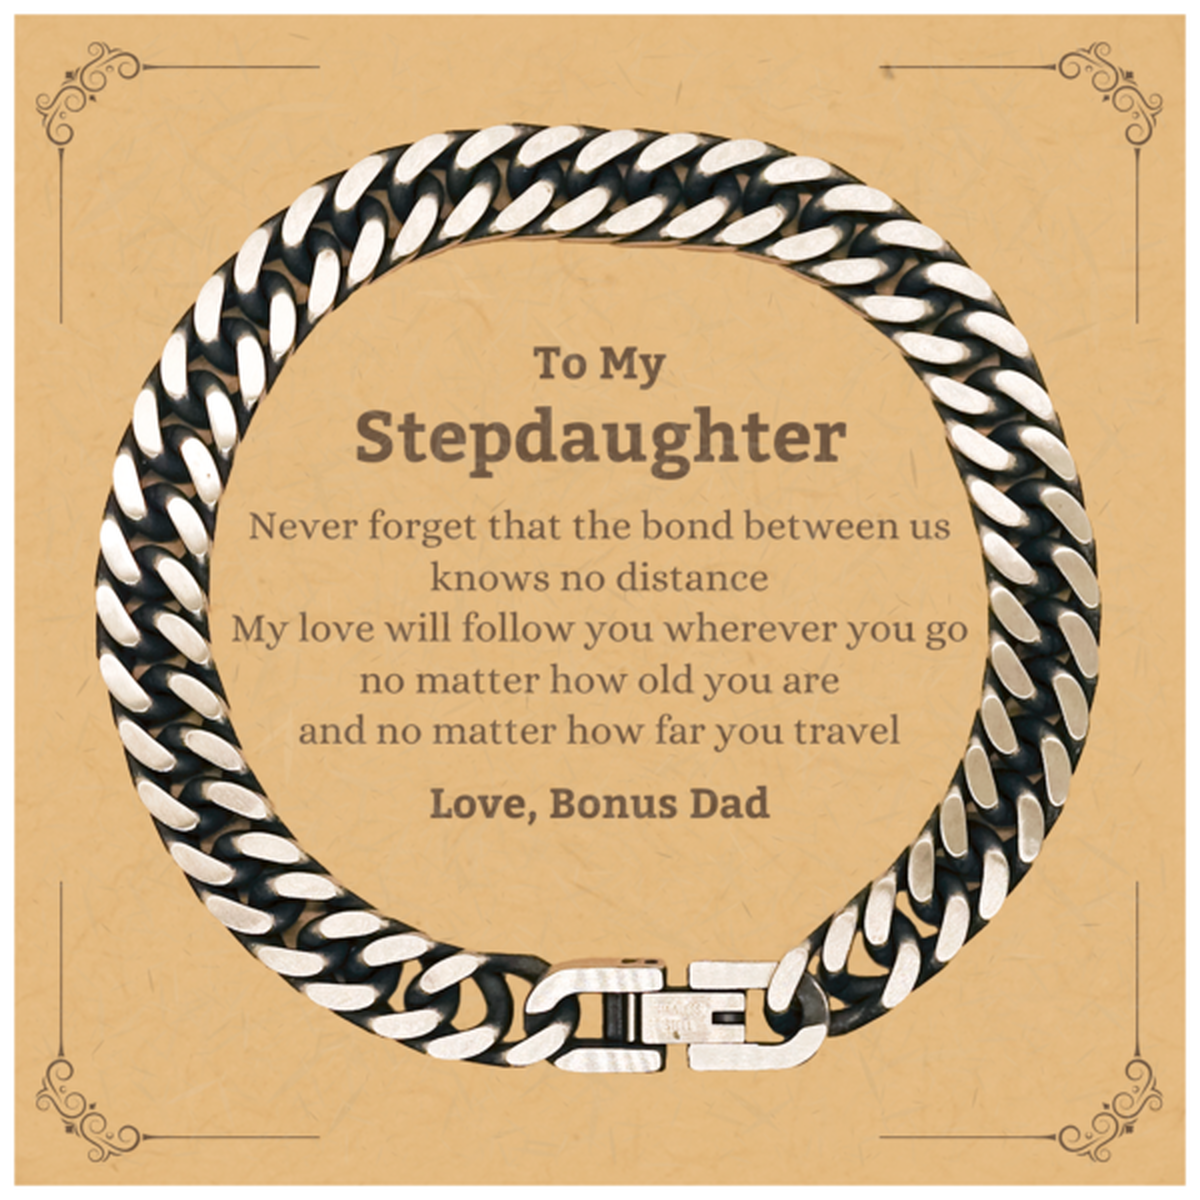 Stepdaughter Birthday Gifts from Bonus Dad, Adjustable Cuban Link Chain Bracelet for Stepdaughter Christmas Graduation Unique Gifts Stepdaughter Never forget that the bond between us knows no distance. Love, Bonus Dad